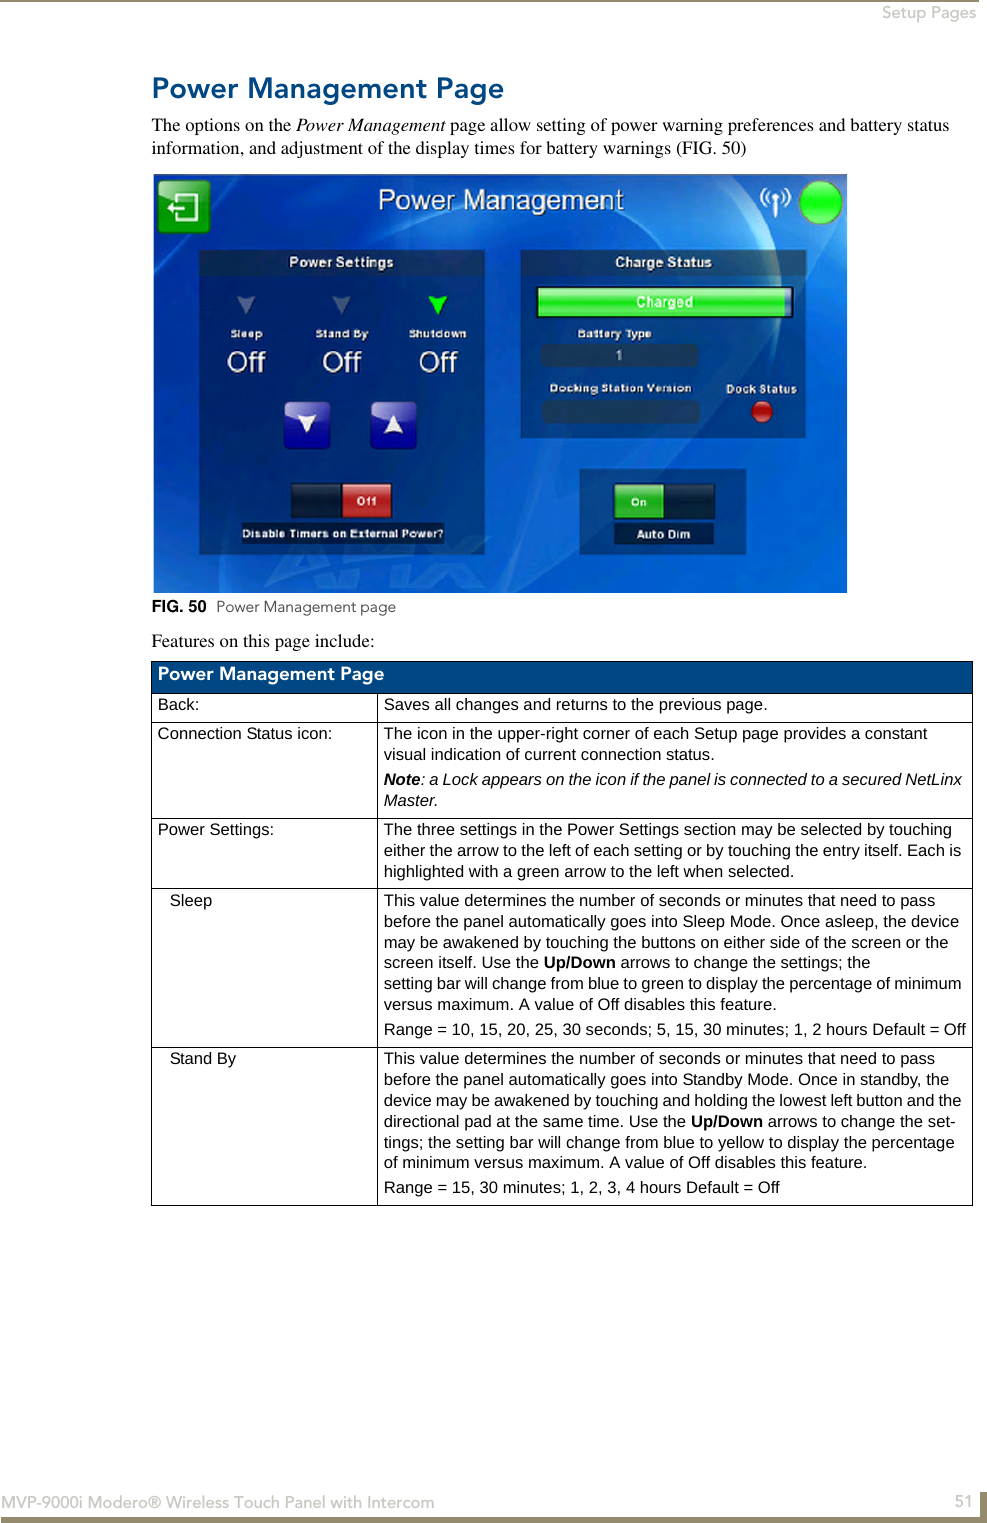 Setup Pages51MVP-9000i Modero® Wireless Touch Panel with IntercomPower Management PageThe options on the Power Management page allow setting of power warning preferences and battery status information, and adjustment of the display times for battery warnings (FIG. 50)  Features on this page include:  FIG. 50  Power Management page Power Management PageBack: Saves all changes and returns to the previous page.Connection Status icon: The icon in the upper-right corner of each Setup page provides a constant visual indication of current connection status.Note: a Lock appears on the icon if the panel is connected to a secured NetLinx Master.Power Settings: The three settings in the Power Settings section may be selected by touching either the arrow to the left of each setting or by touching the entry itself. Each is highlighted with a green arrow to the left when selected. Sleep This value determines the number of seconds or minutes that need to pass before the panel automatically goes into Sleep Mode. Once asleep, the device may be awakened by touching the buttons on either side of the screen or the screen itself. Use the Up/Down arrows to change the settings; the setting bar will change from blue to green to display the percentage of minimum versus maximum. A value of Off disables this feature.Range = 10, 15, 20, 25, 30 seconds; 5, 15, 30 minutes; 1, 2 hours Default = OffStand By This value determines the number of seconds or minutes that need to pass before the panel automatically goes into Standby Mode. Once in standby, the device may be awakened by touching and holding the lowest left button and the directional pad at the same time. Use the Up/Down arrows to change the set-tings; the setting bar will change from blue to yellow to display the percentage of minimum versus maximum. A value of Off disables this feature.Range = 15, 30 minutes; 1, 2, 3, 4 hours Default = Off